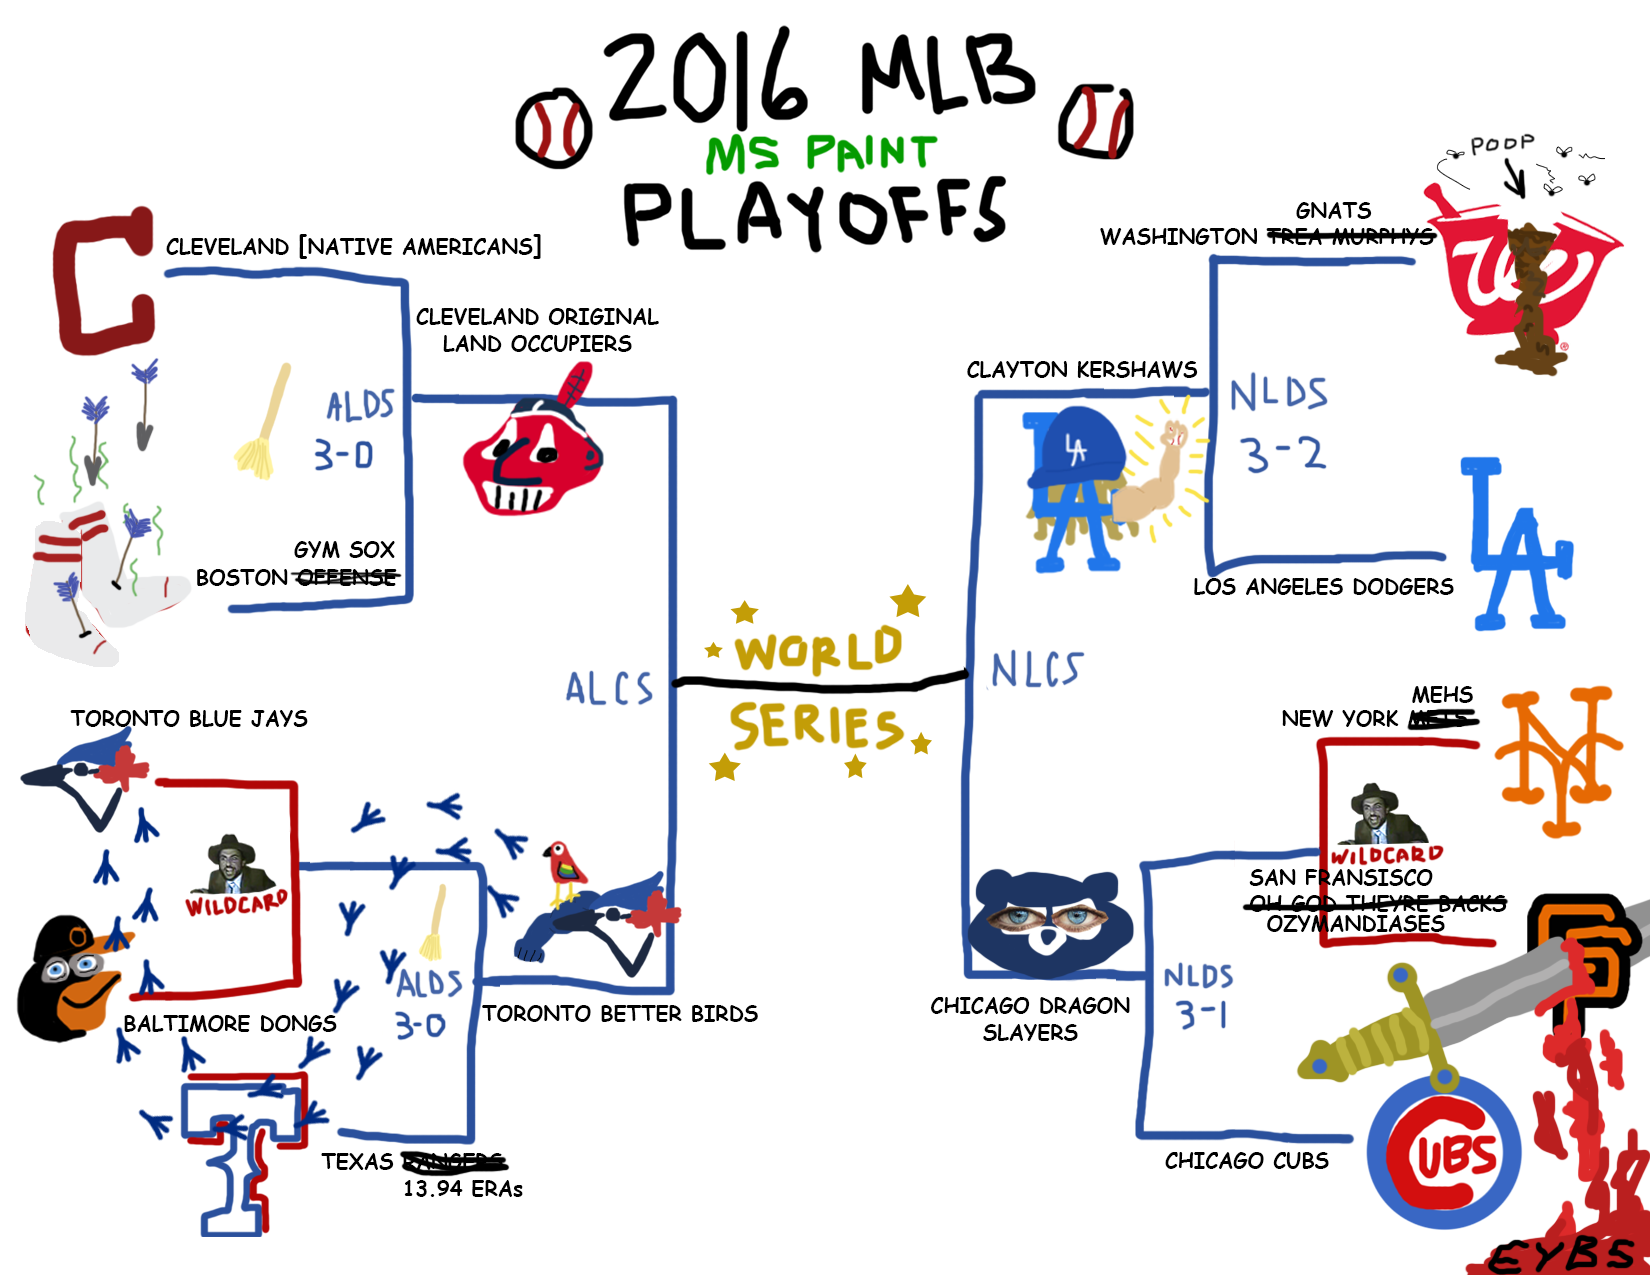 Happy Friday! The MS Paint bracket has been updated for the AL/NLCS!